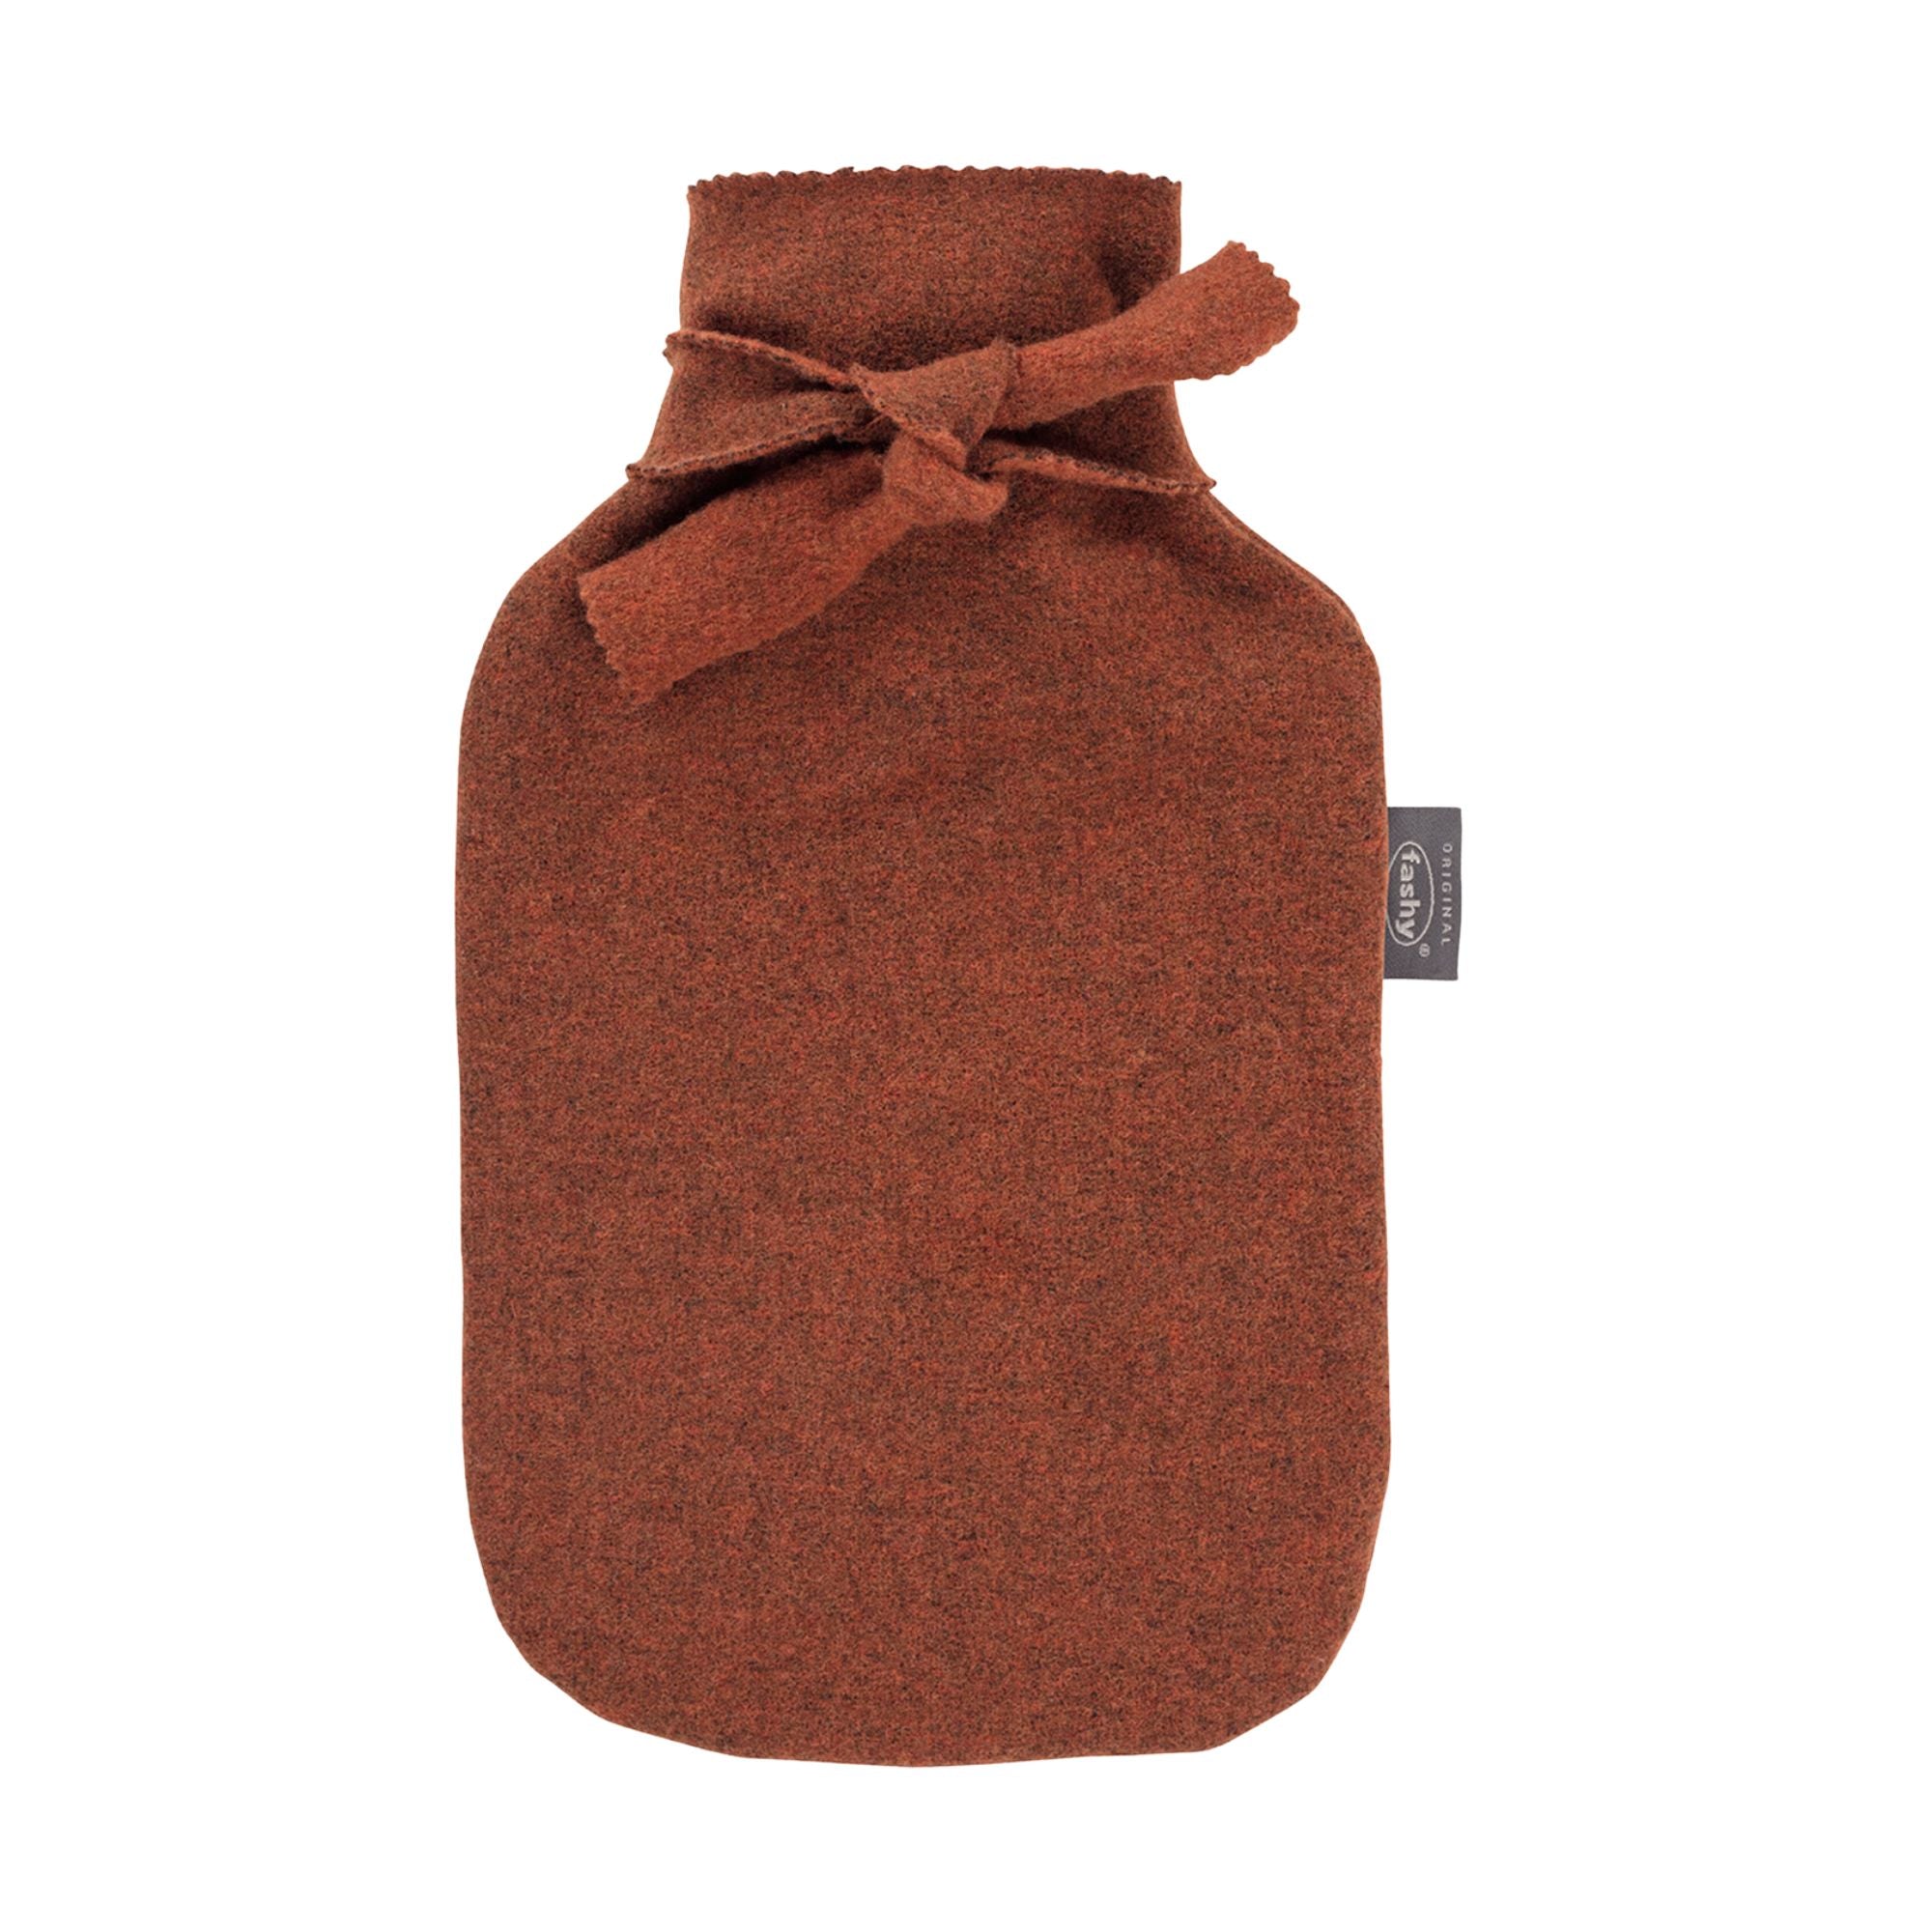 2 Litre Fashy Hot Water Bottle with a Premium Rusty Tie Cover